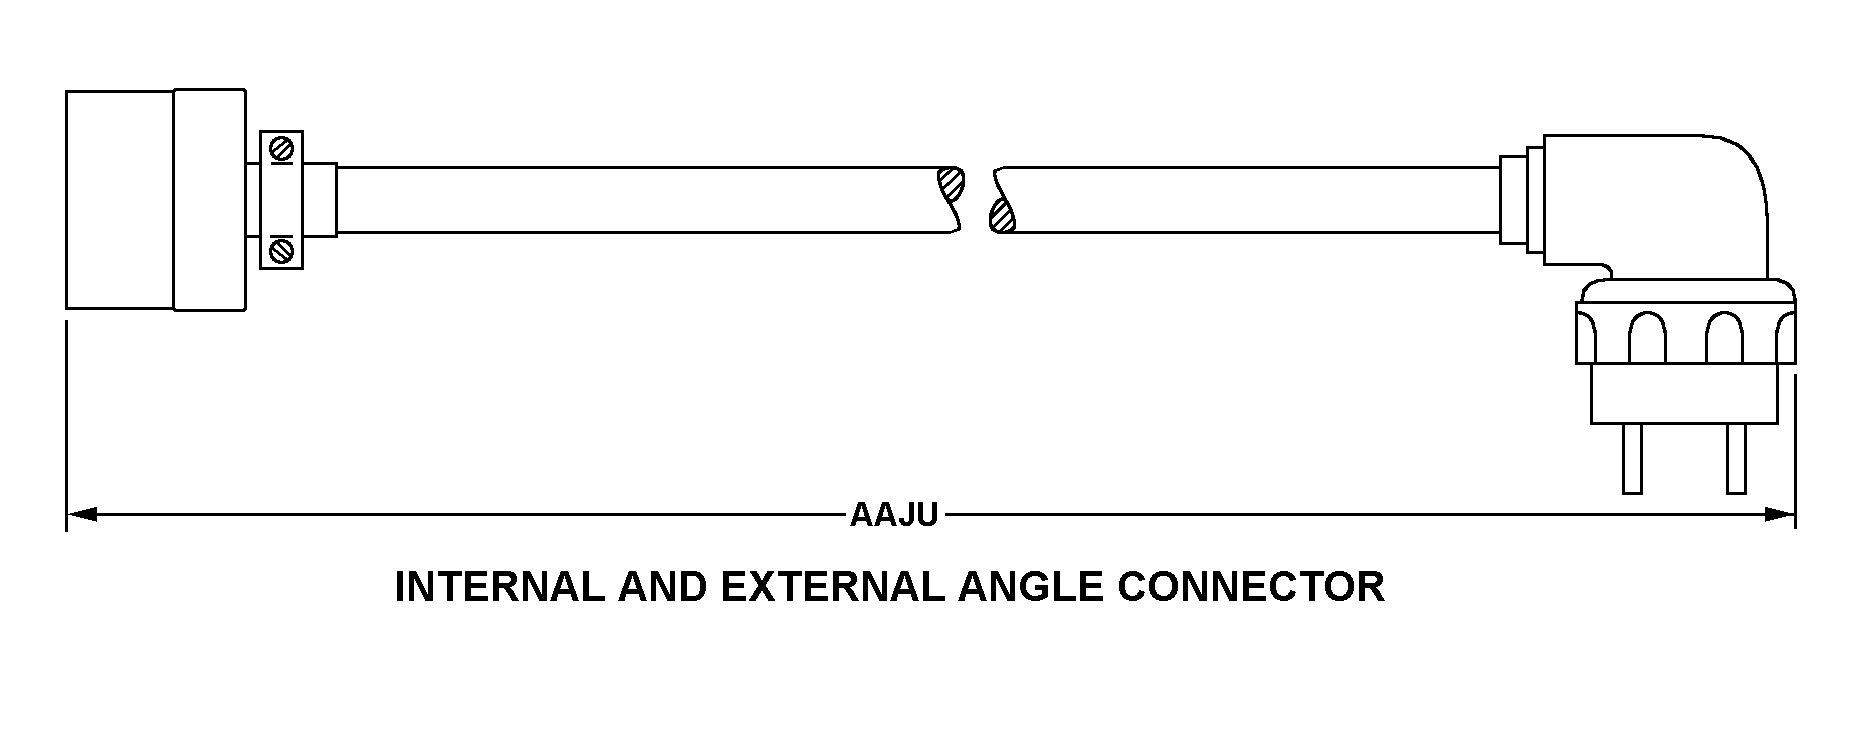 INTERNAL AND EXTERNAL ANGLE CONNECTOR style nsn 6150-00-018-7614